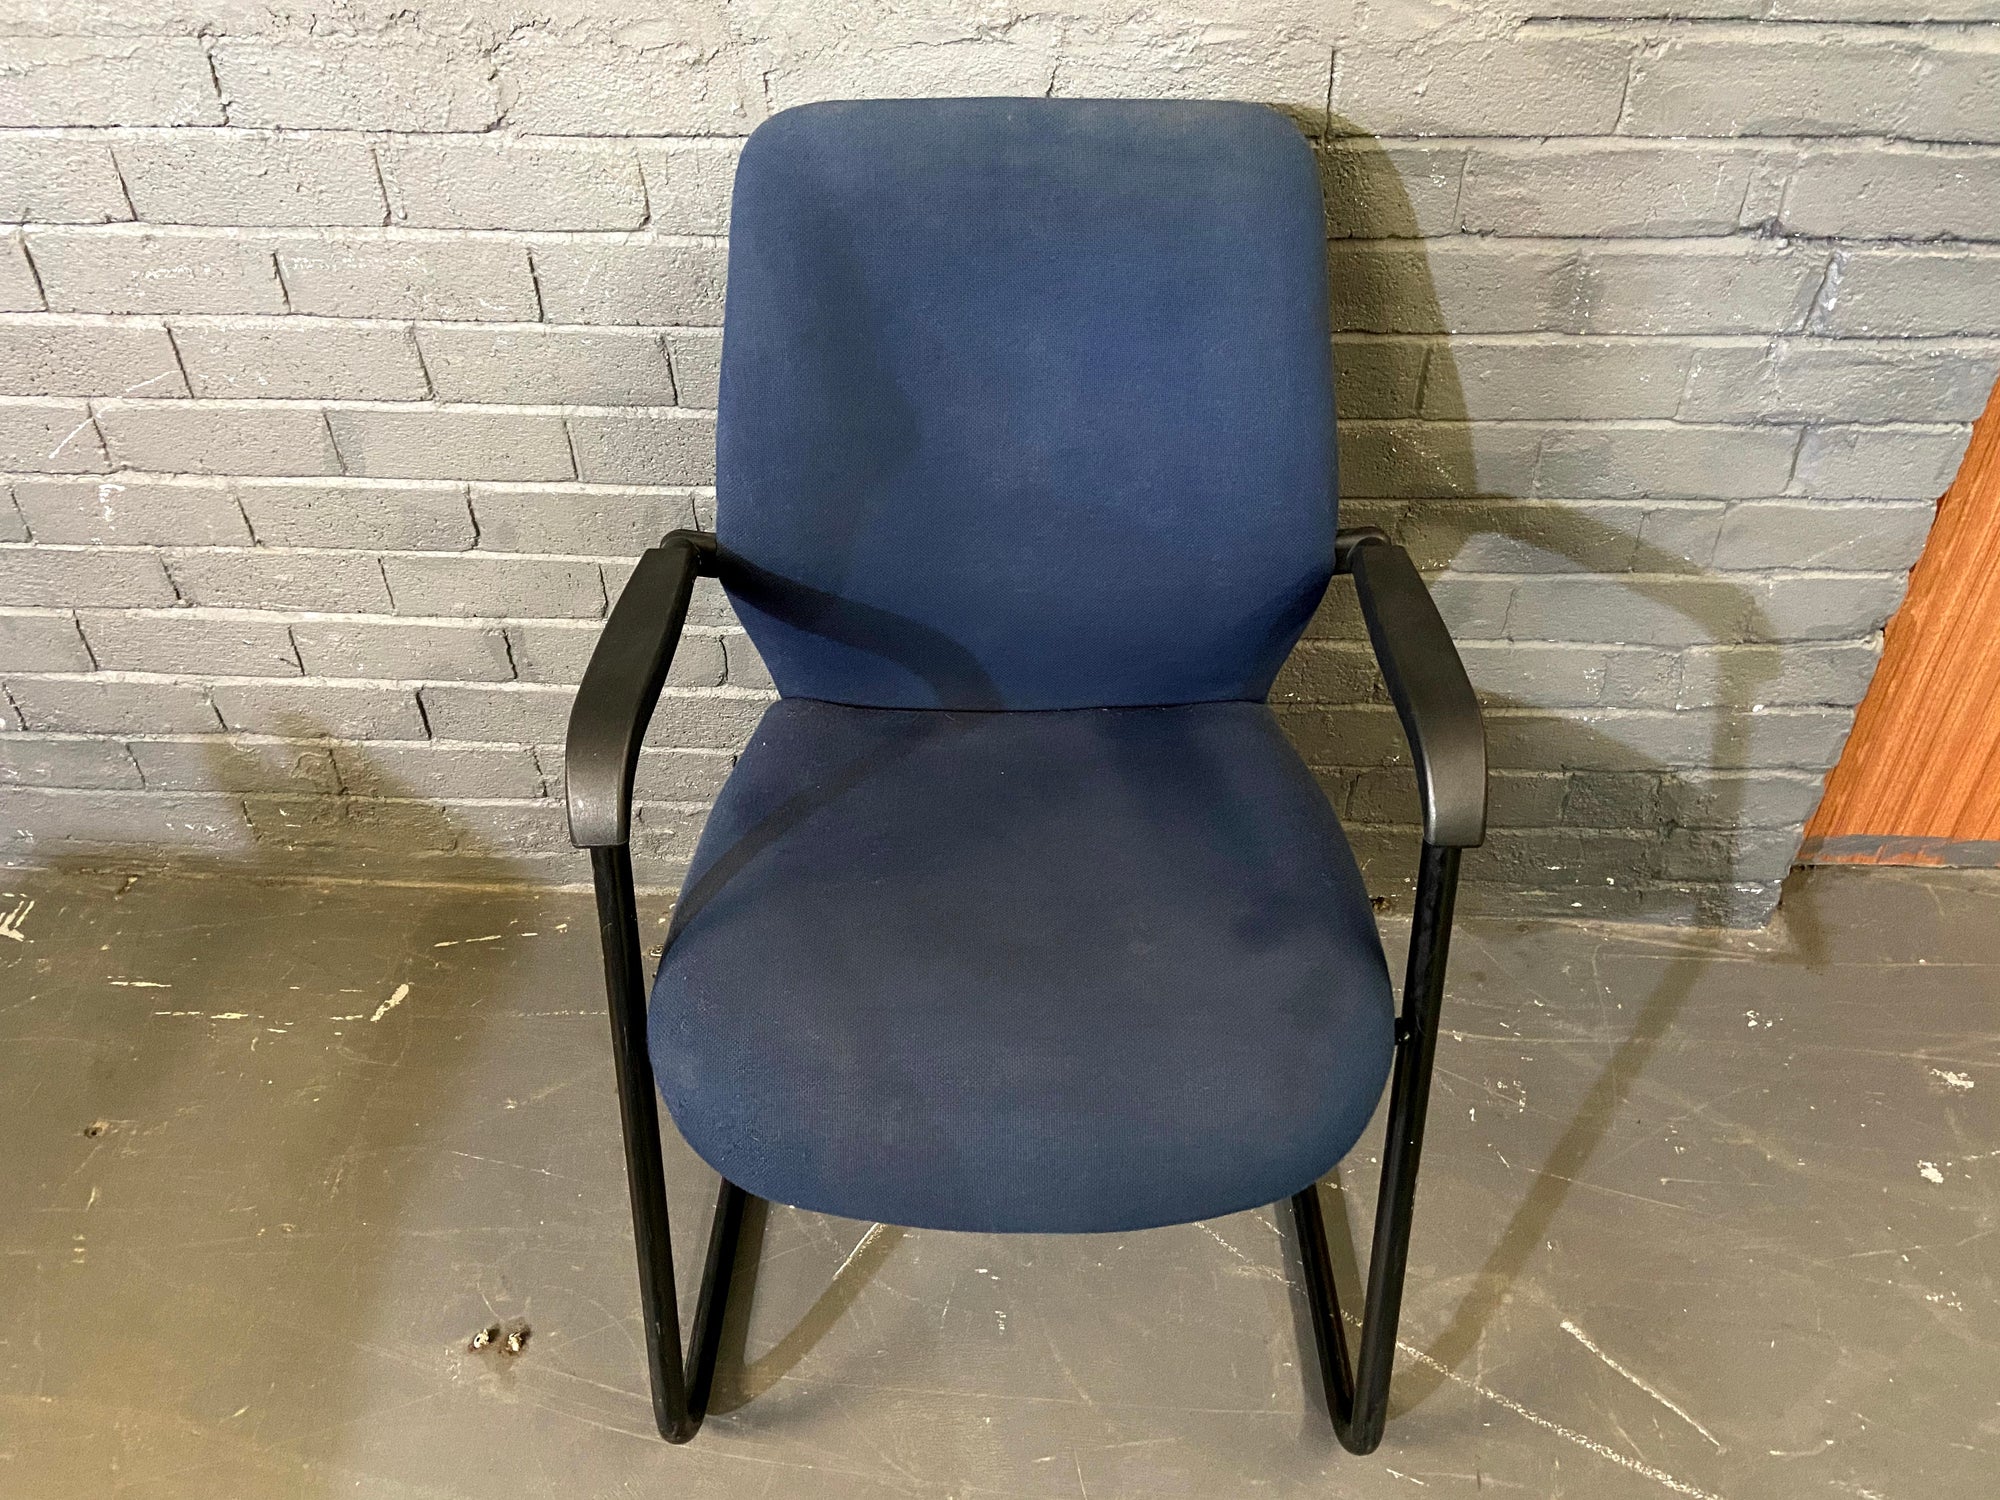 Blue Visitor Chair - 2ndhandwarehouse.com